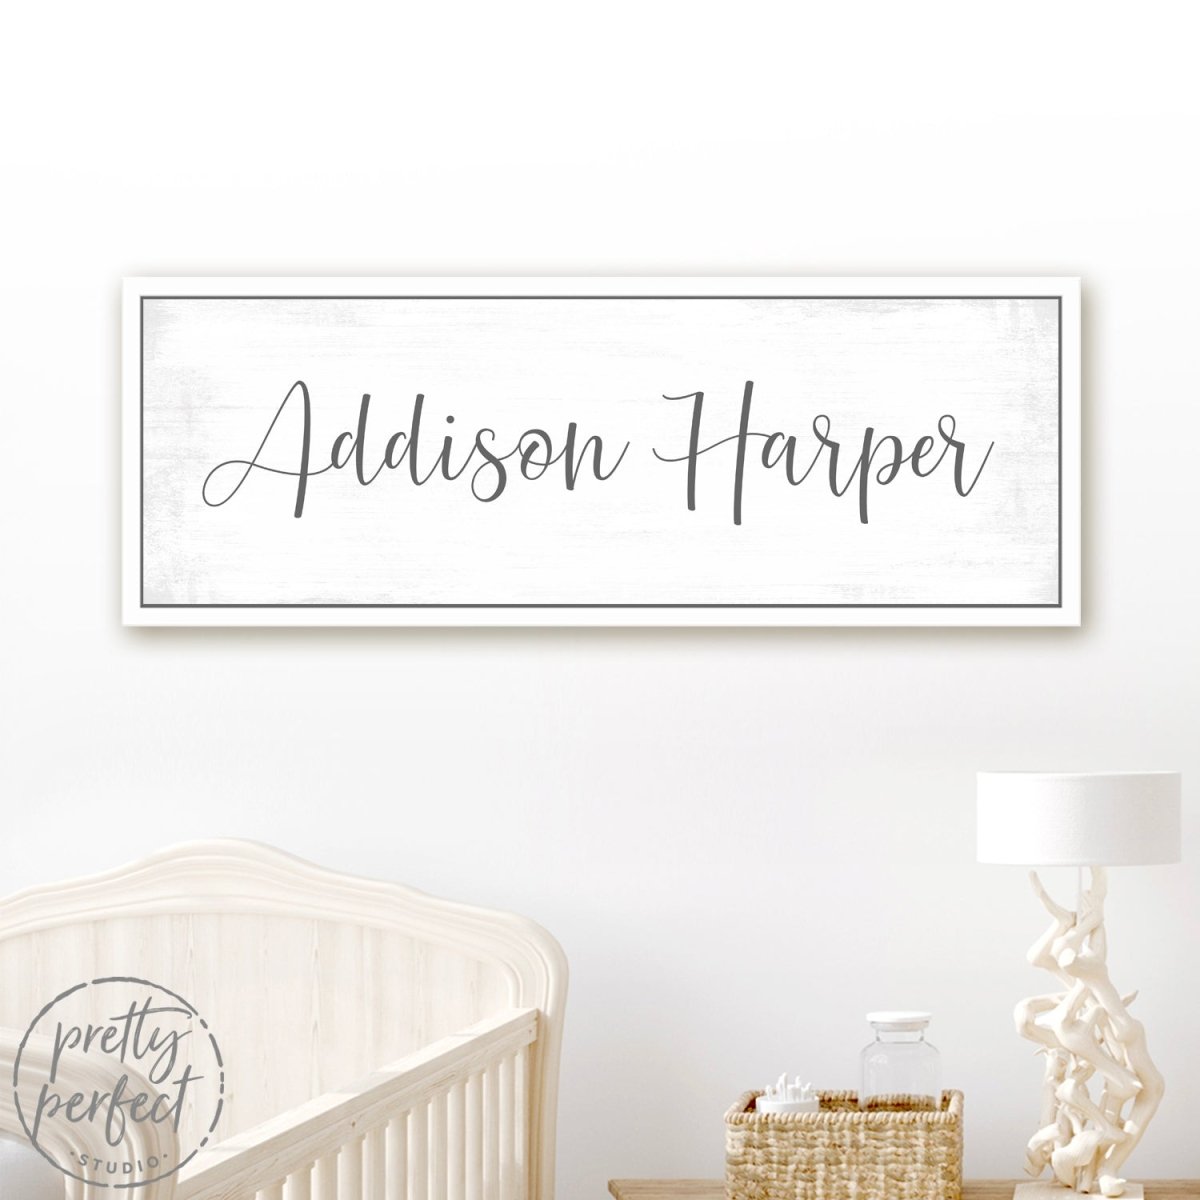 Baby Girl's Personalized Name Canvas Wall Art for the Nursery Room Above Crib - Pretty Perfect Studio